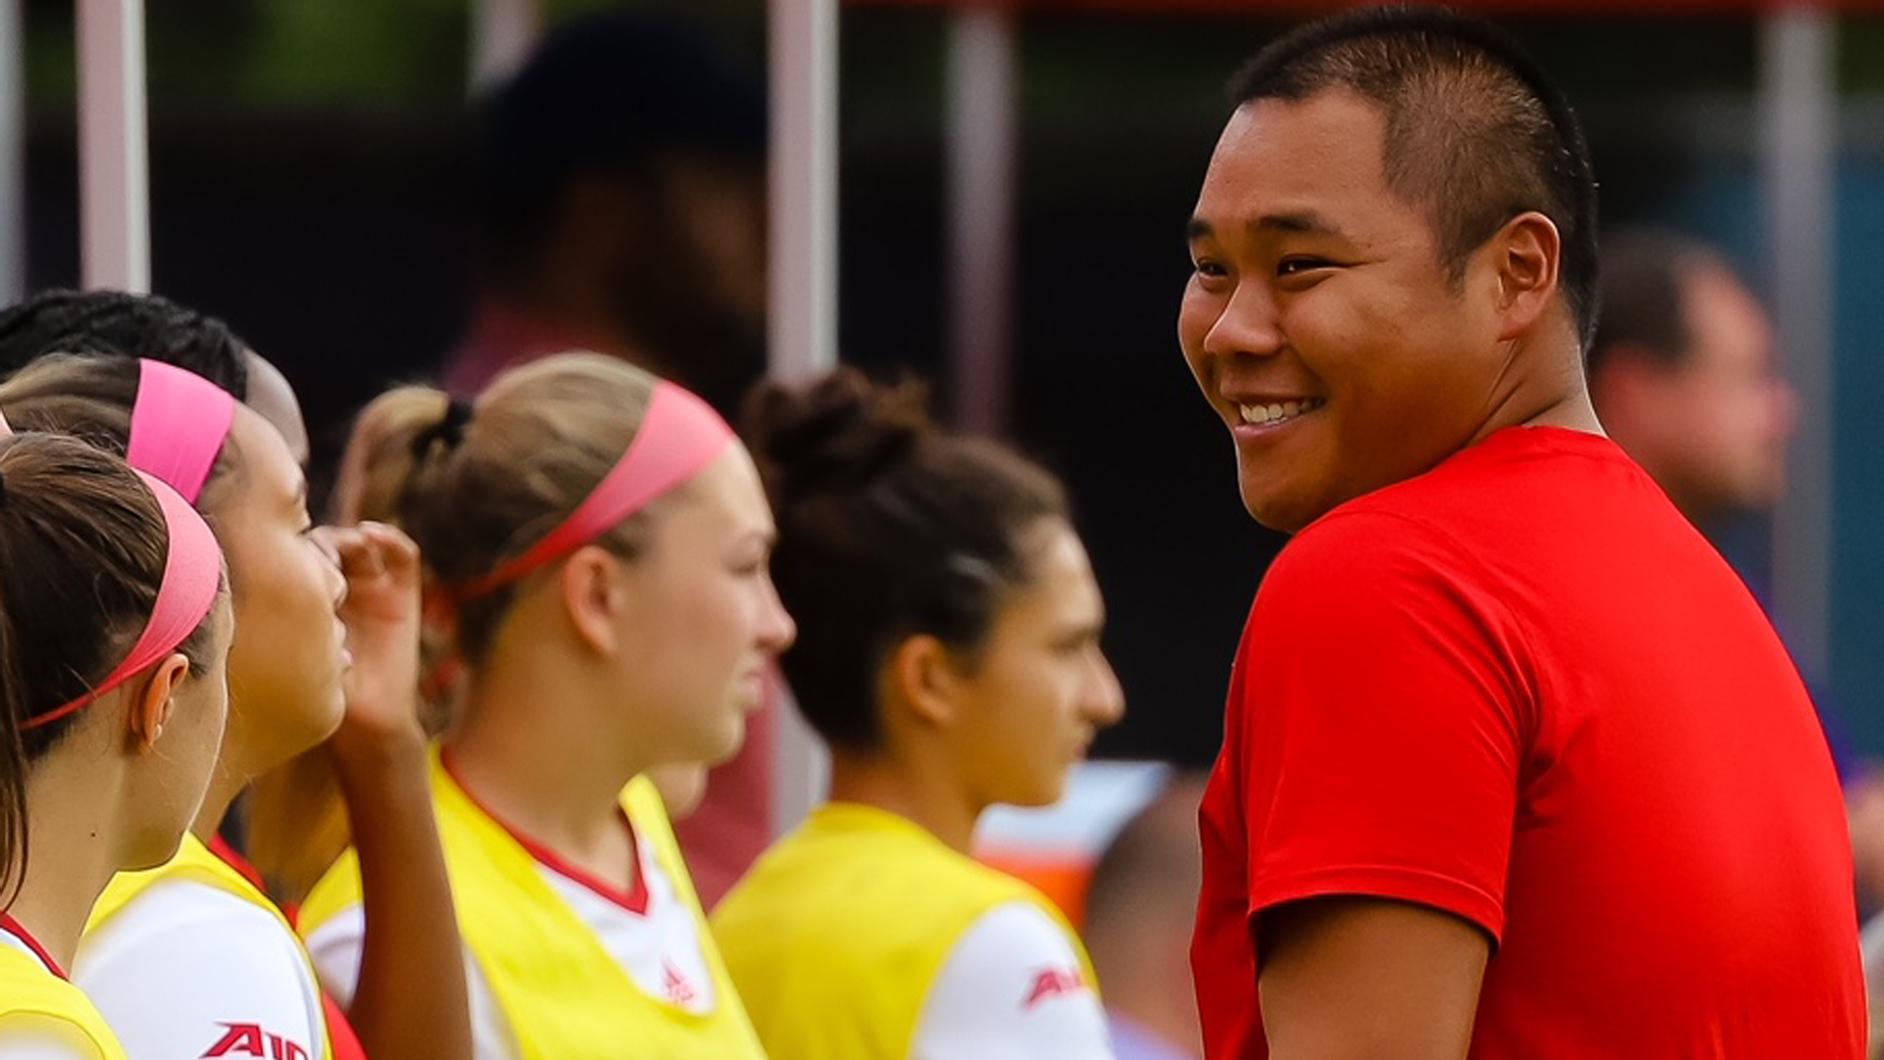 Maryland Women’s Soccer Recruiting Coordinator Alex Ng on What Coaches Look for in a Player